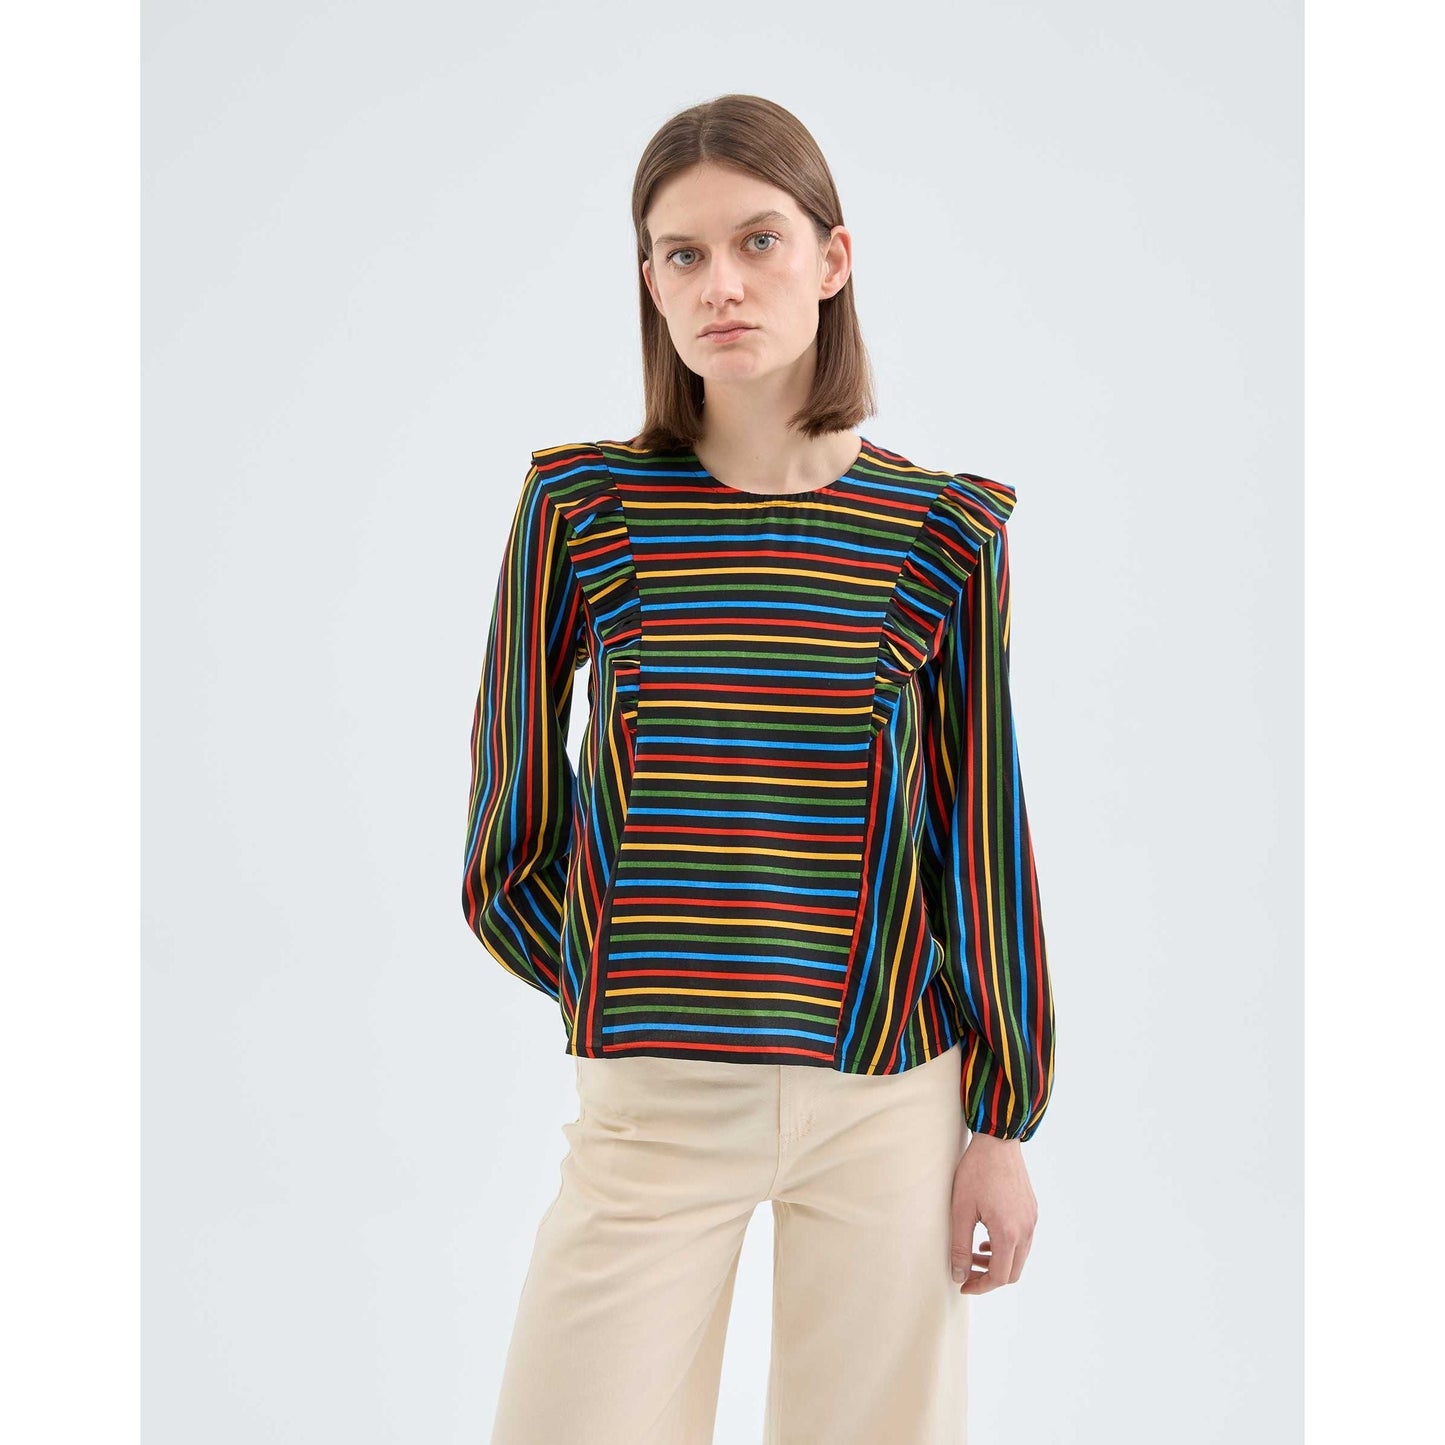 Compania Fantastica - Long-sleeved top with ruffles and multicolored stripe print